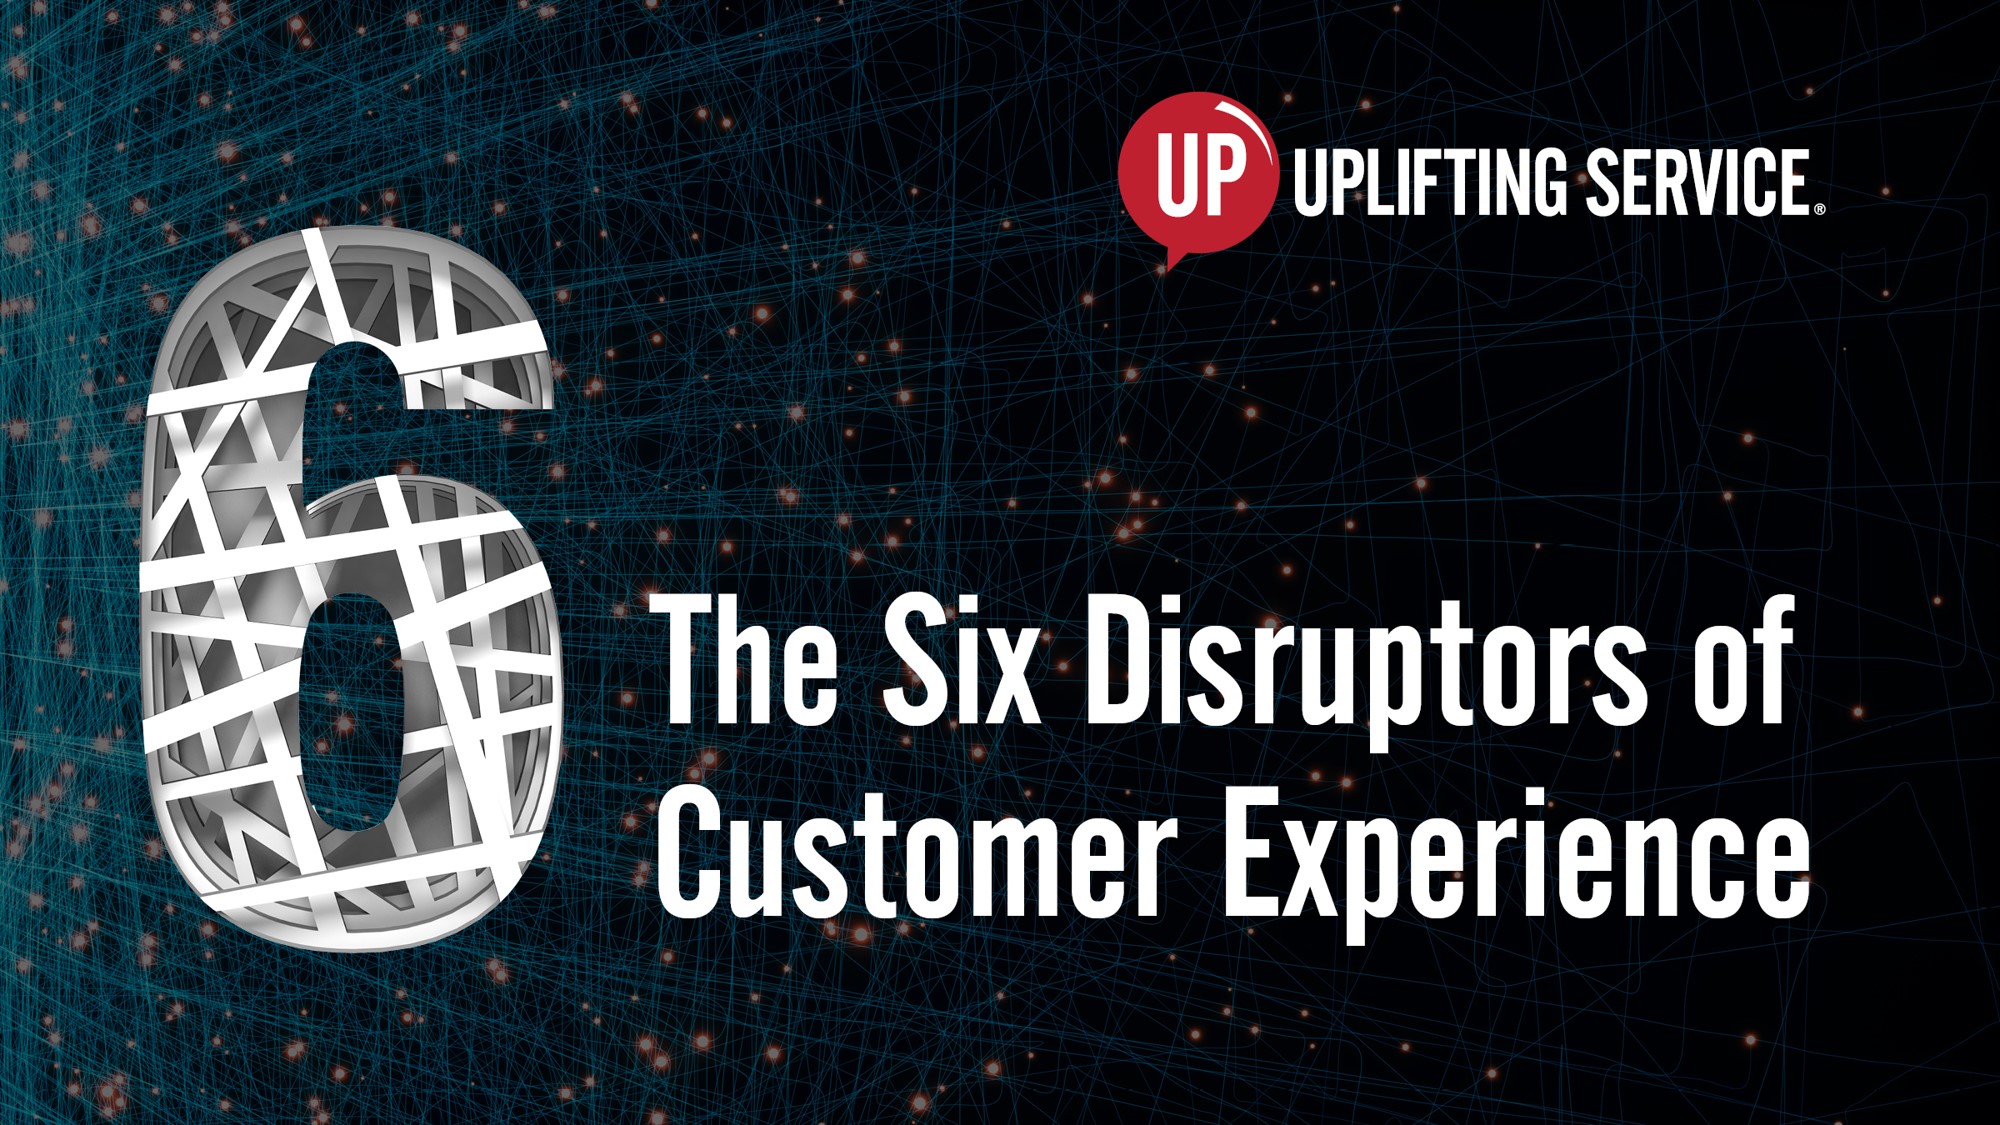 The Six Disruptors of Customer Experience